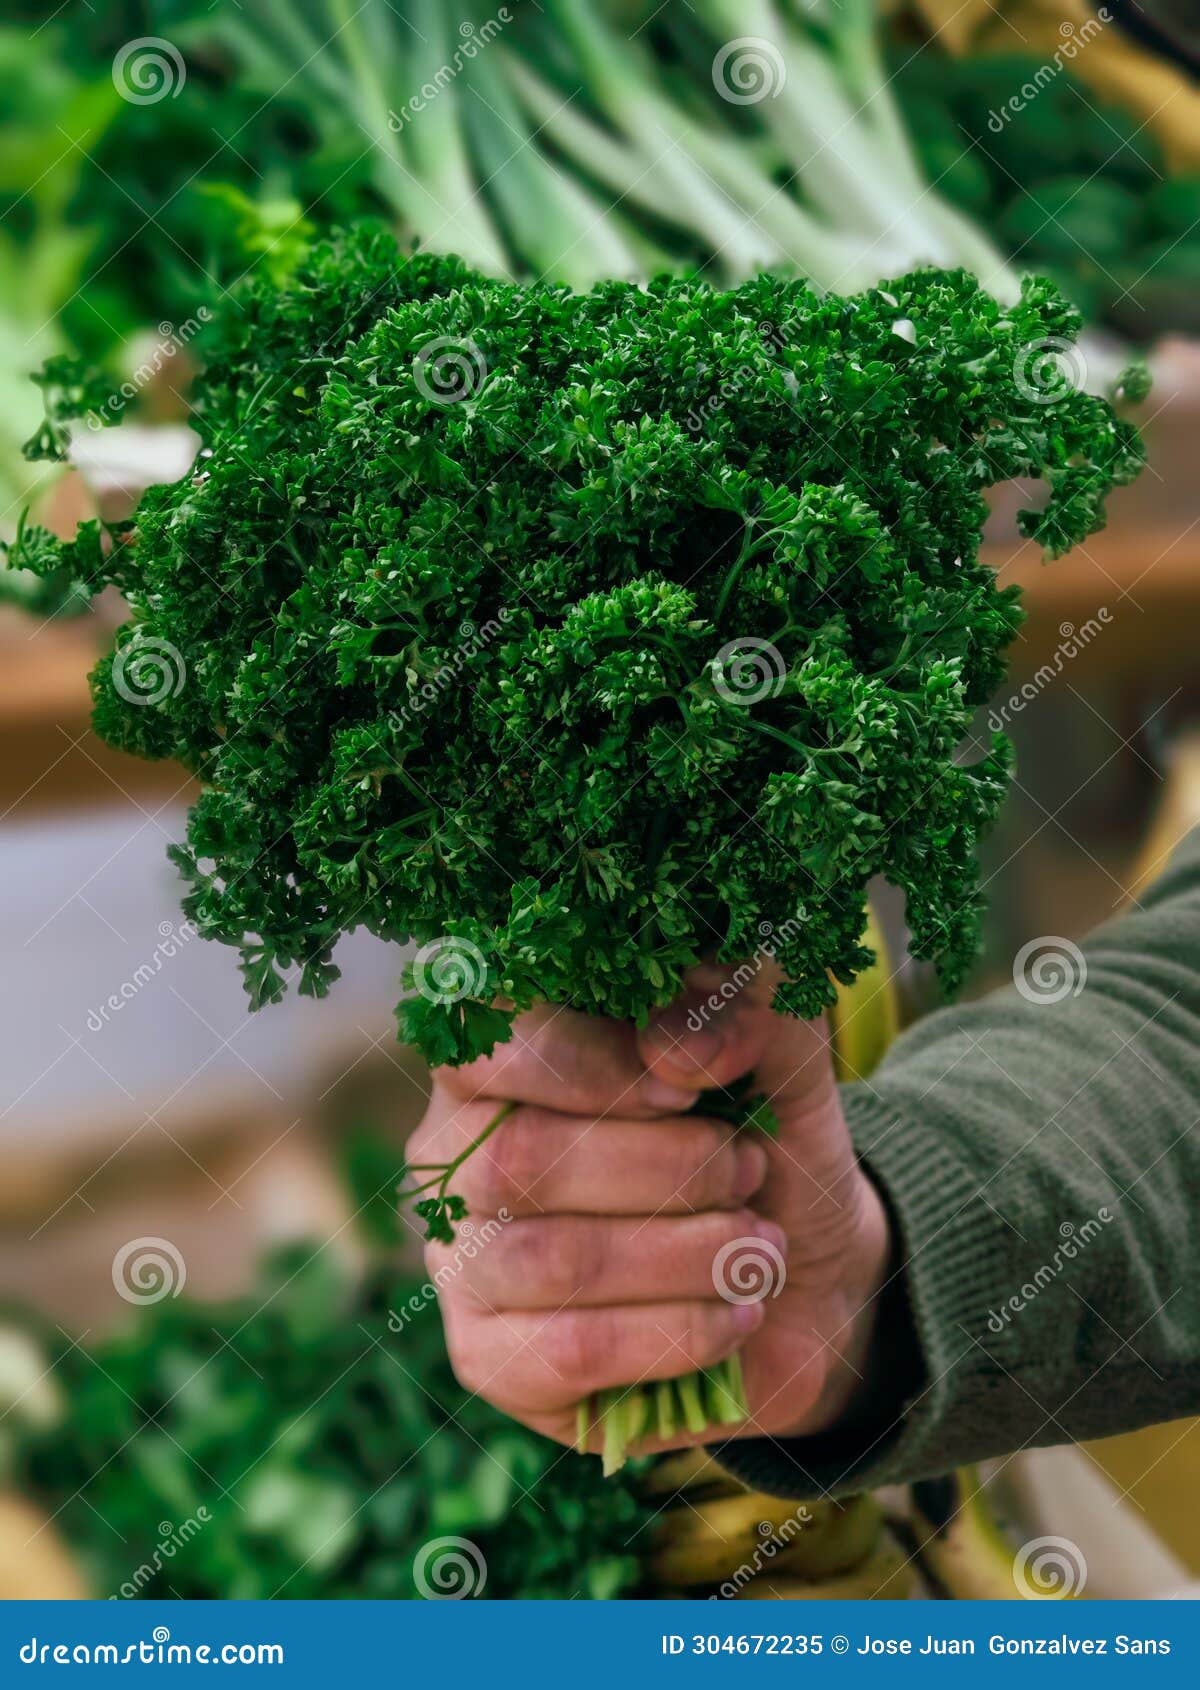 curly or wild parsley in hand